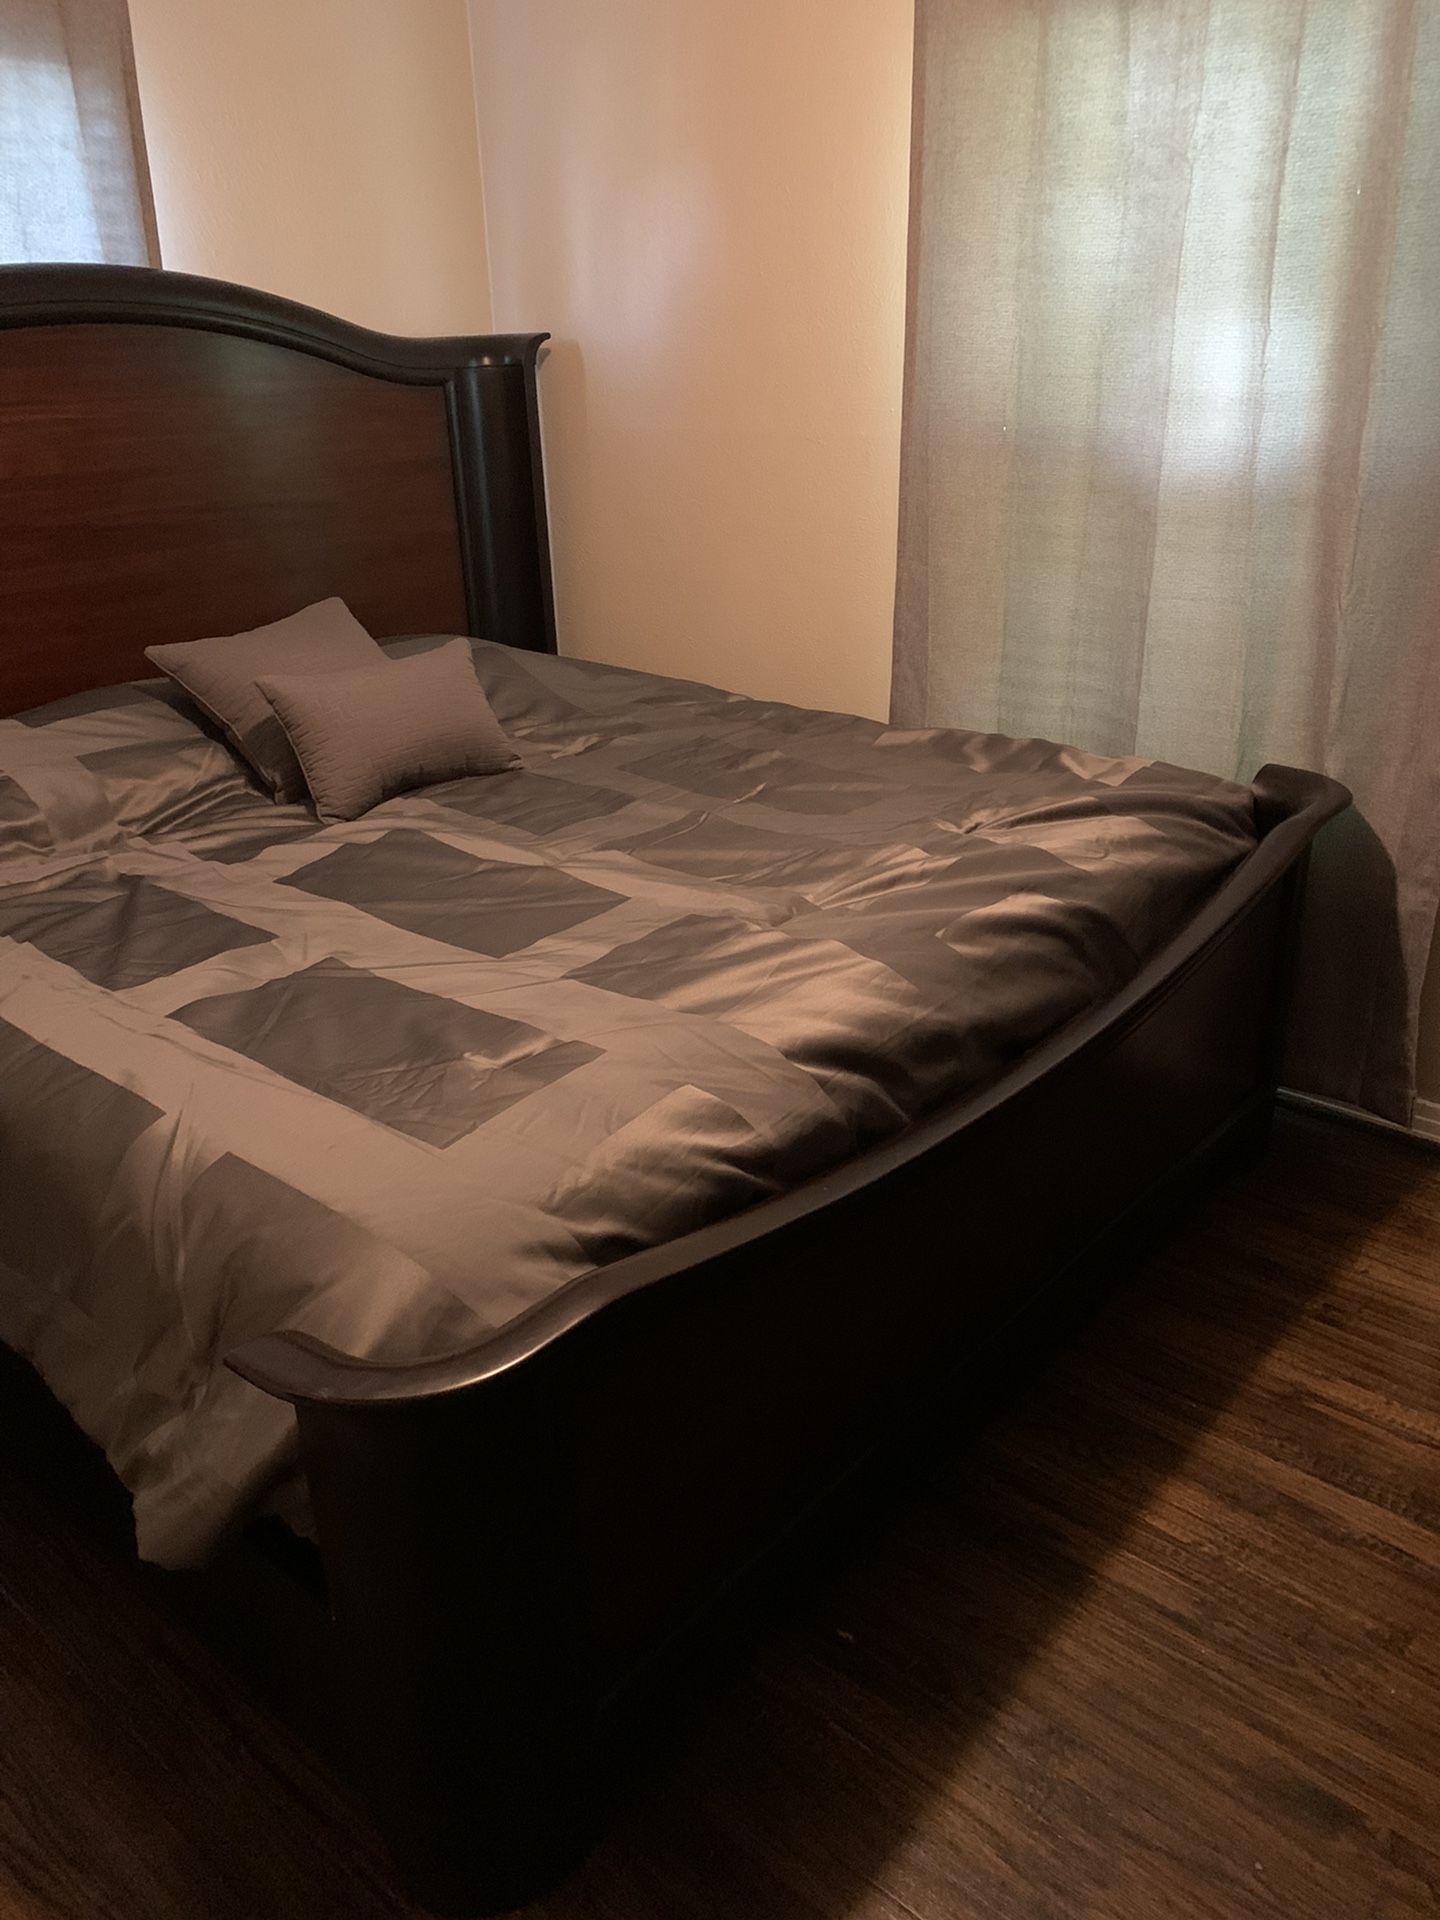 Beautiful King Size Bedroom Set With Comfy Posturpedic Mattress